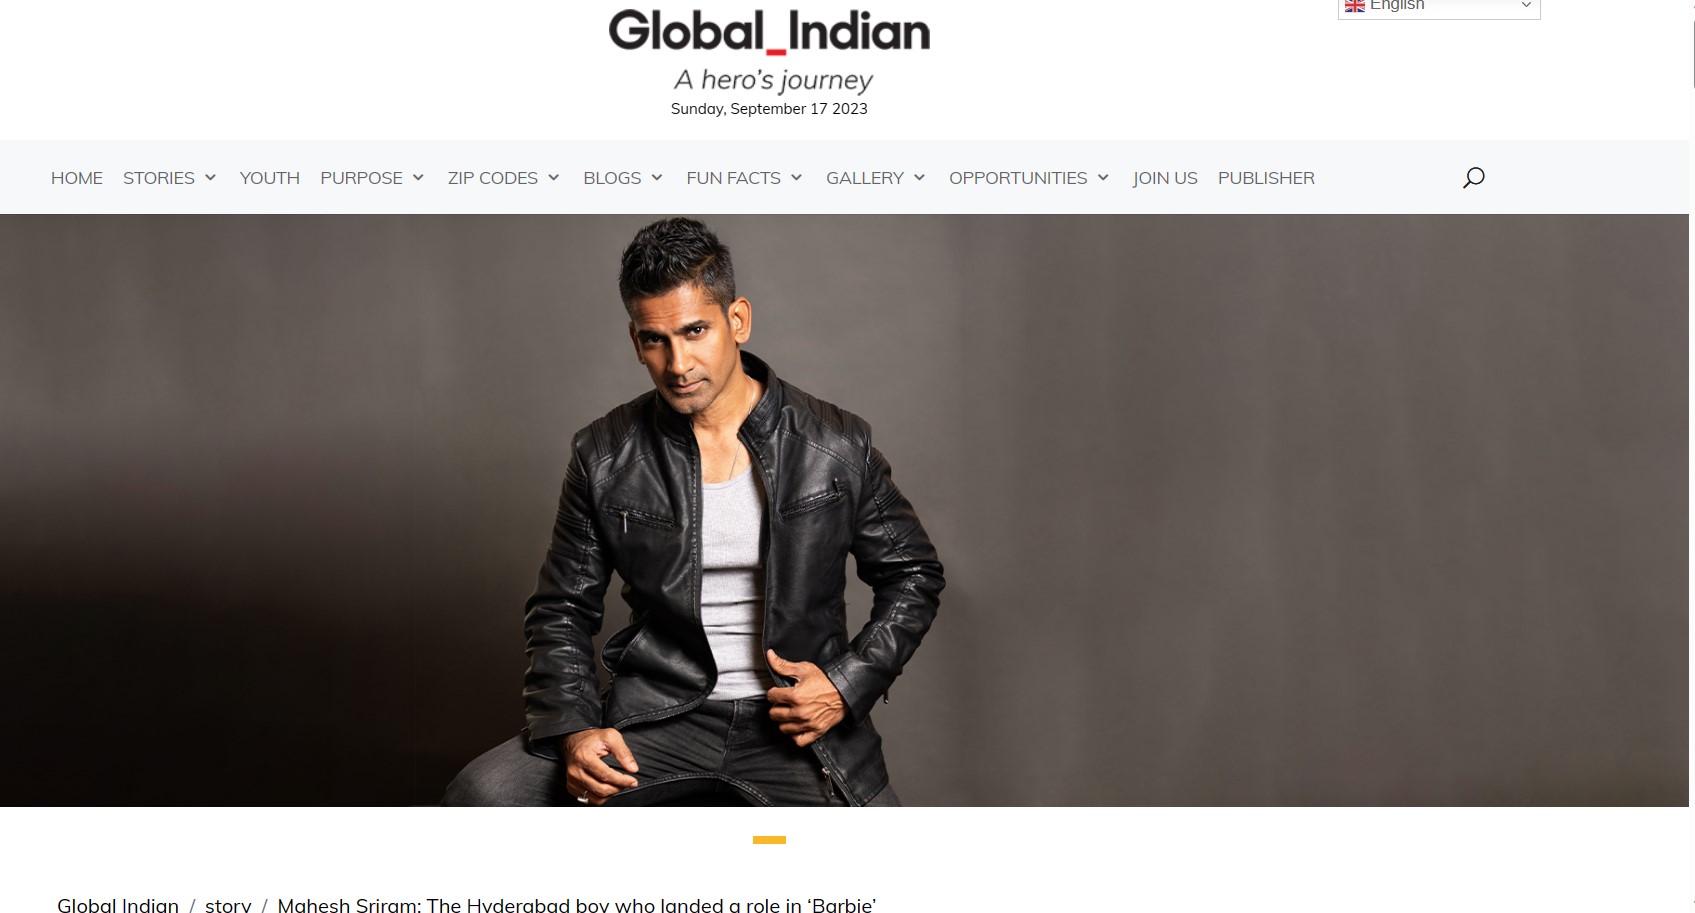 https://www.globalindian.com/story/global-indian-exclusive/from-tollywood-to-hollywood-actor-mahesh-srirams-path-to-international-fame/